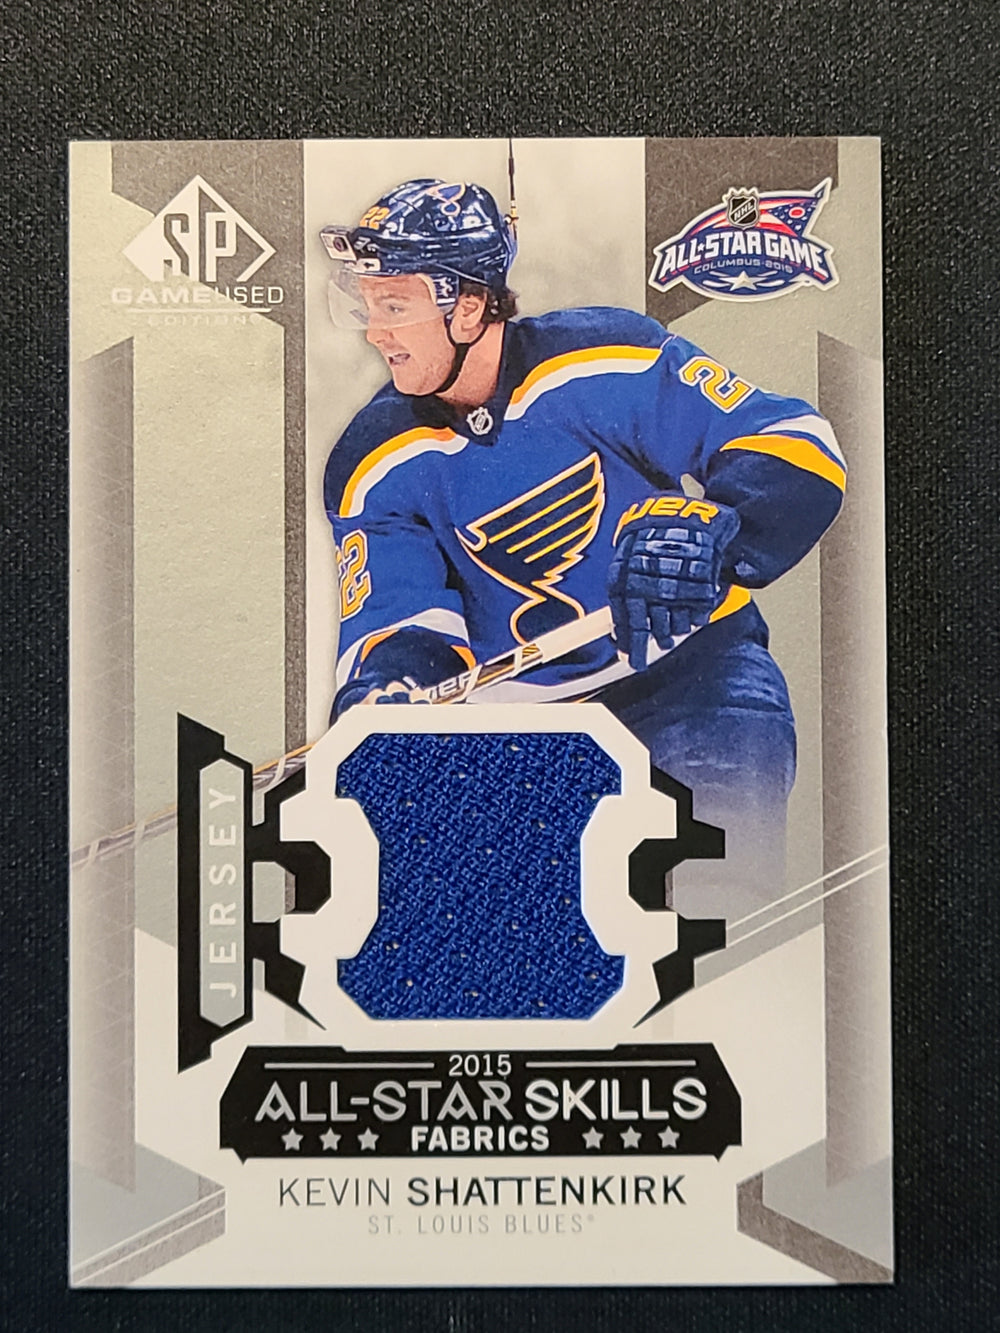 2015-16 SP Game Used All-Star Skills Fabrics #AS-16 Kevin Shattenkirk St. Louis Blues